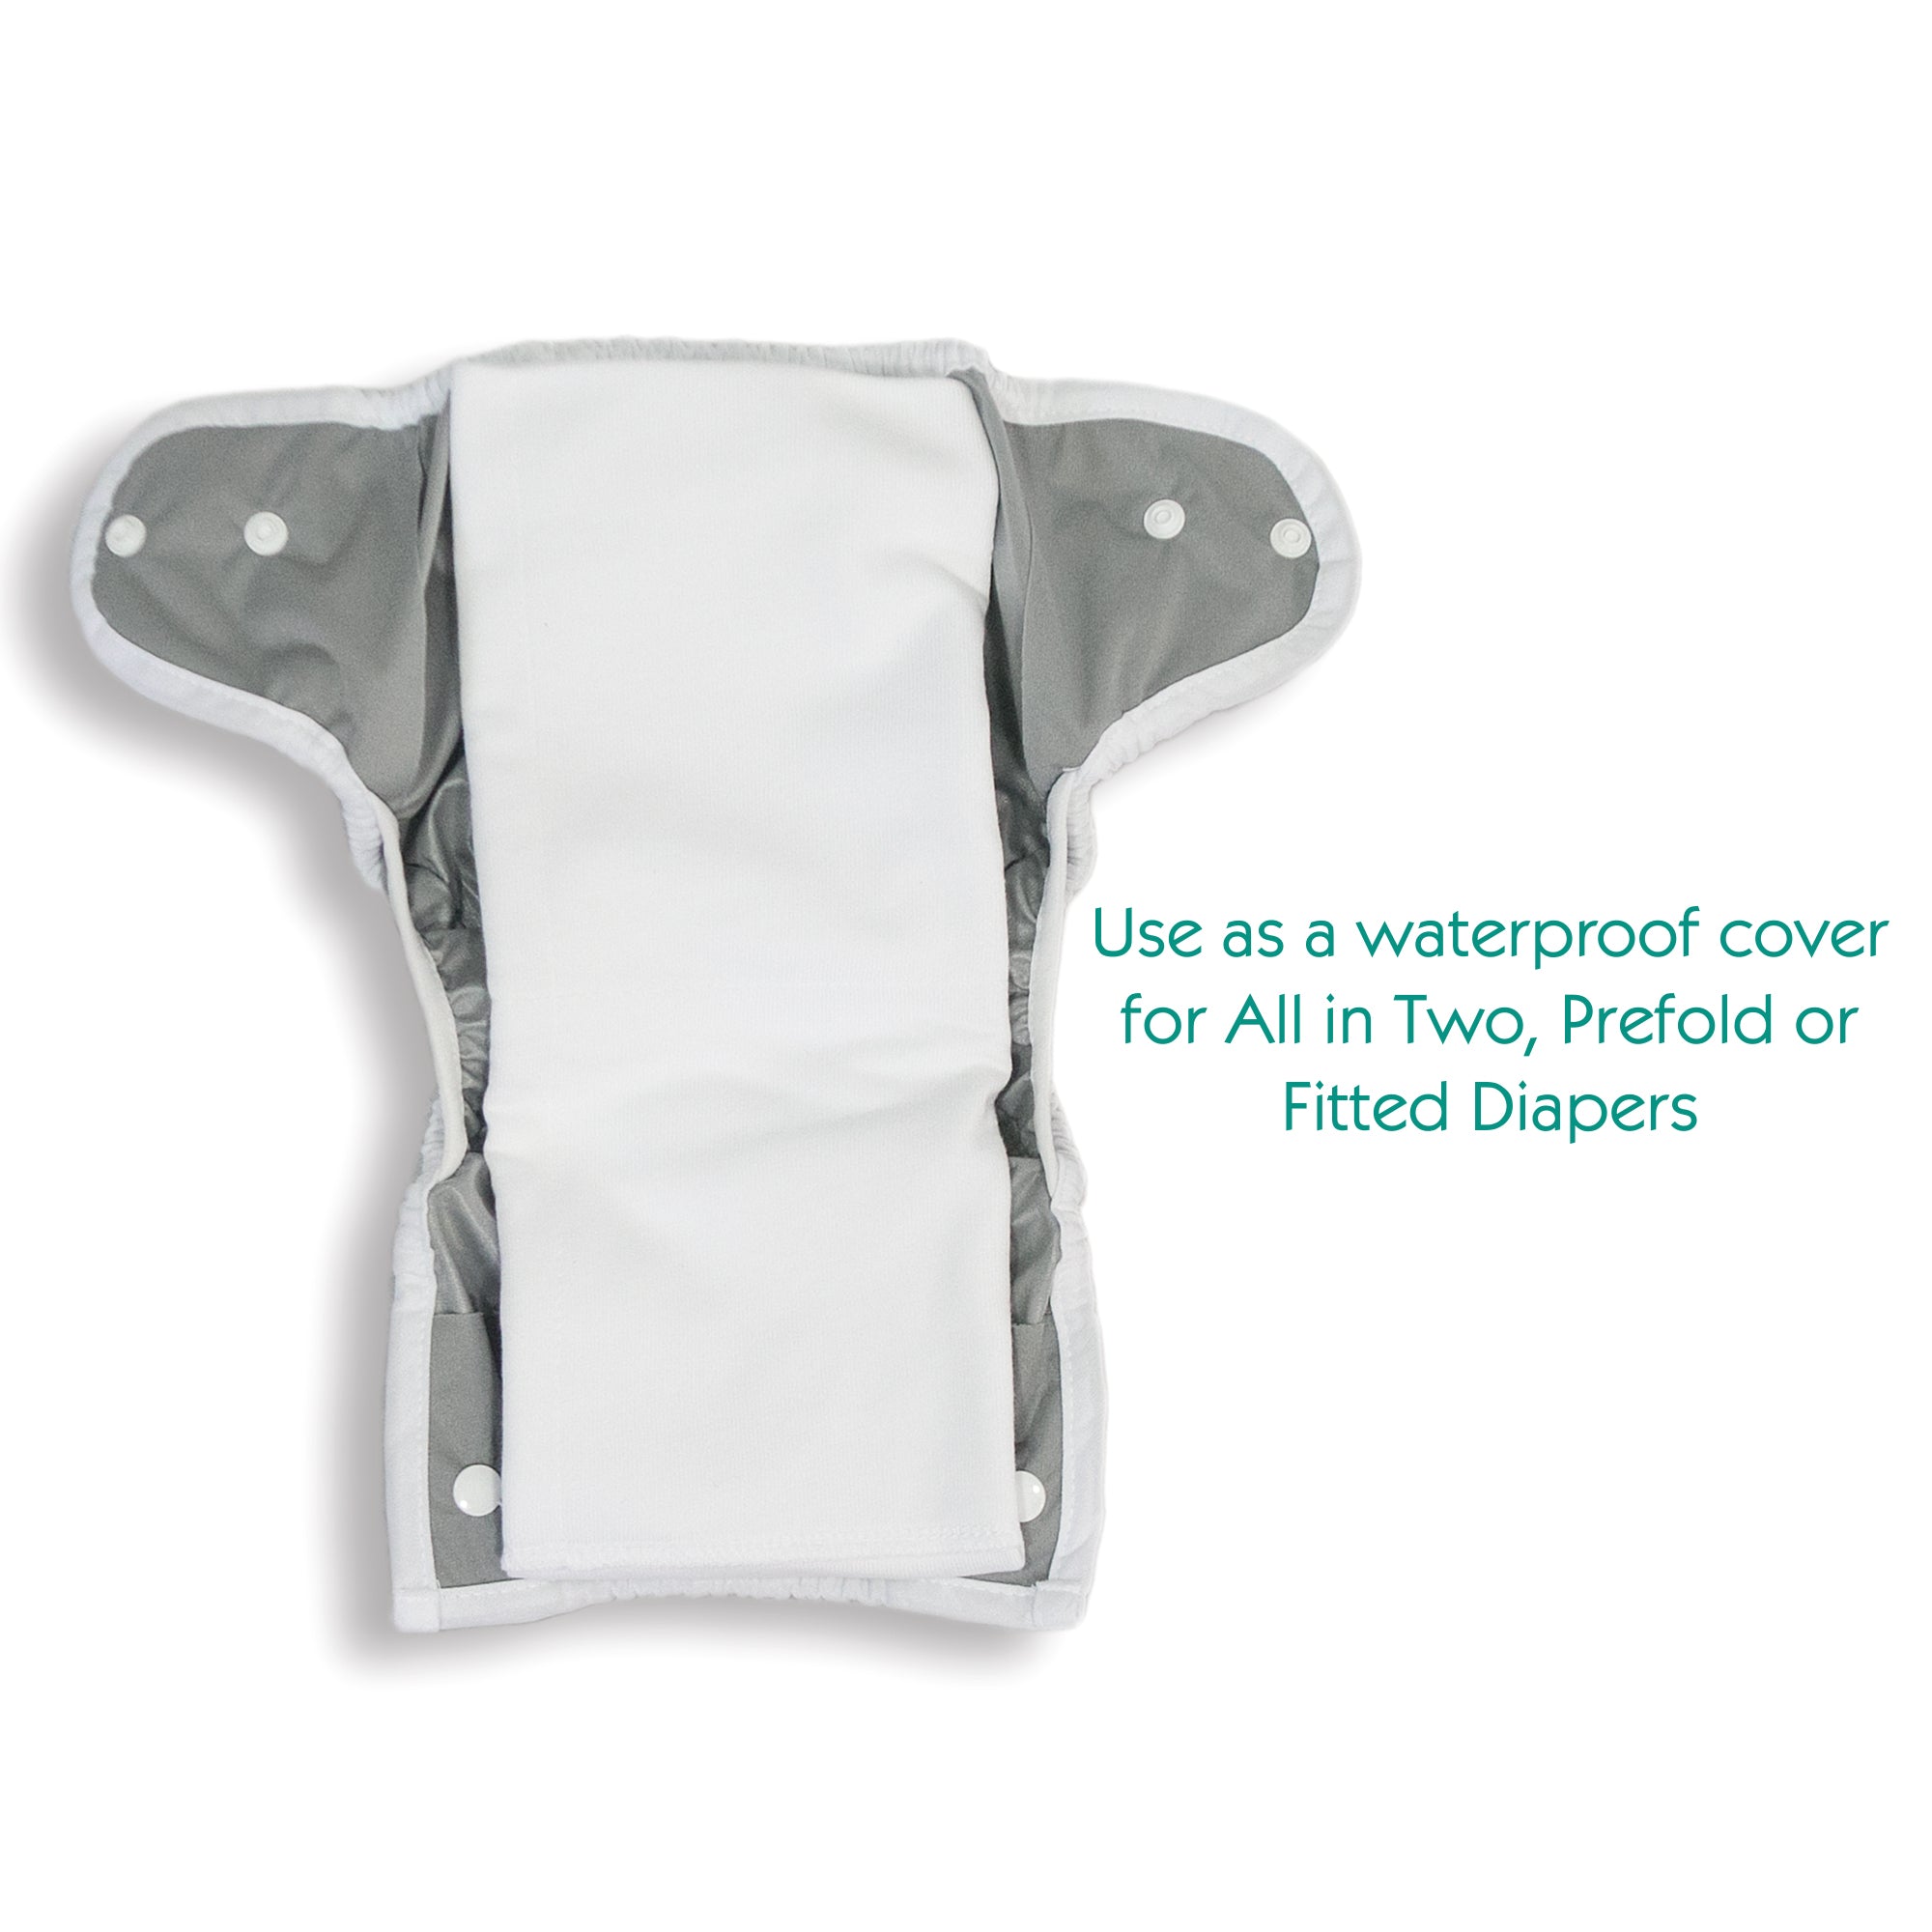 '-Image of Thirsties Diaper Cover open with a folded Thirsties Duo Help Prefold with text: Use as a waterproof cover for All in Two, Prefold or Fitted Diapers